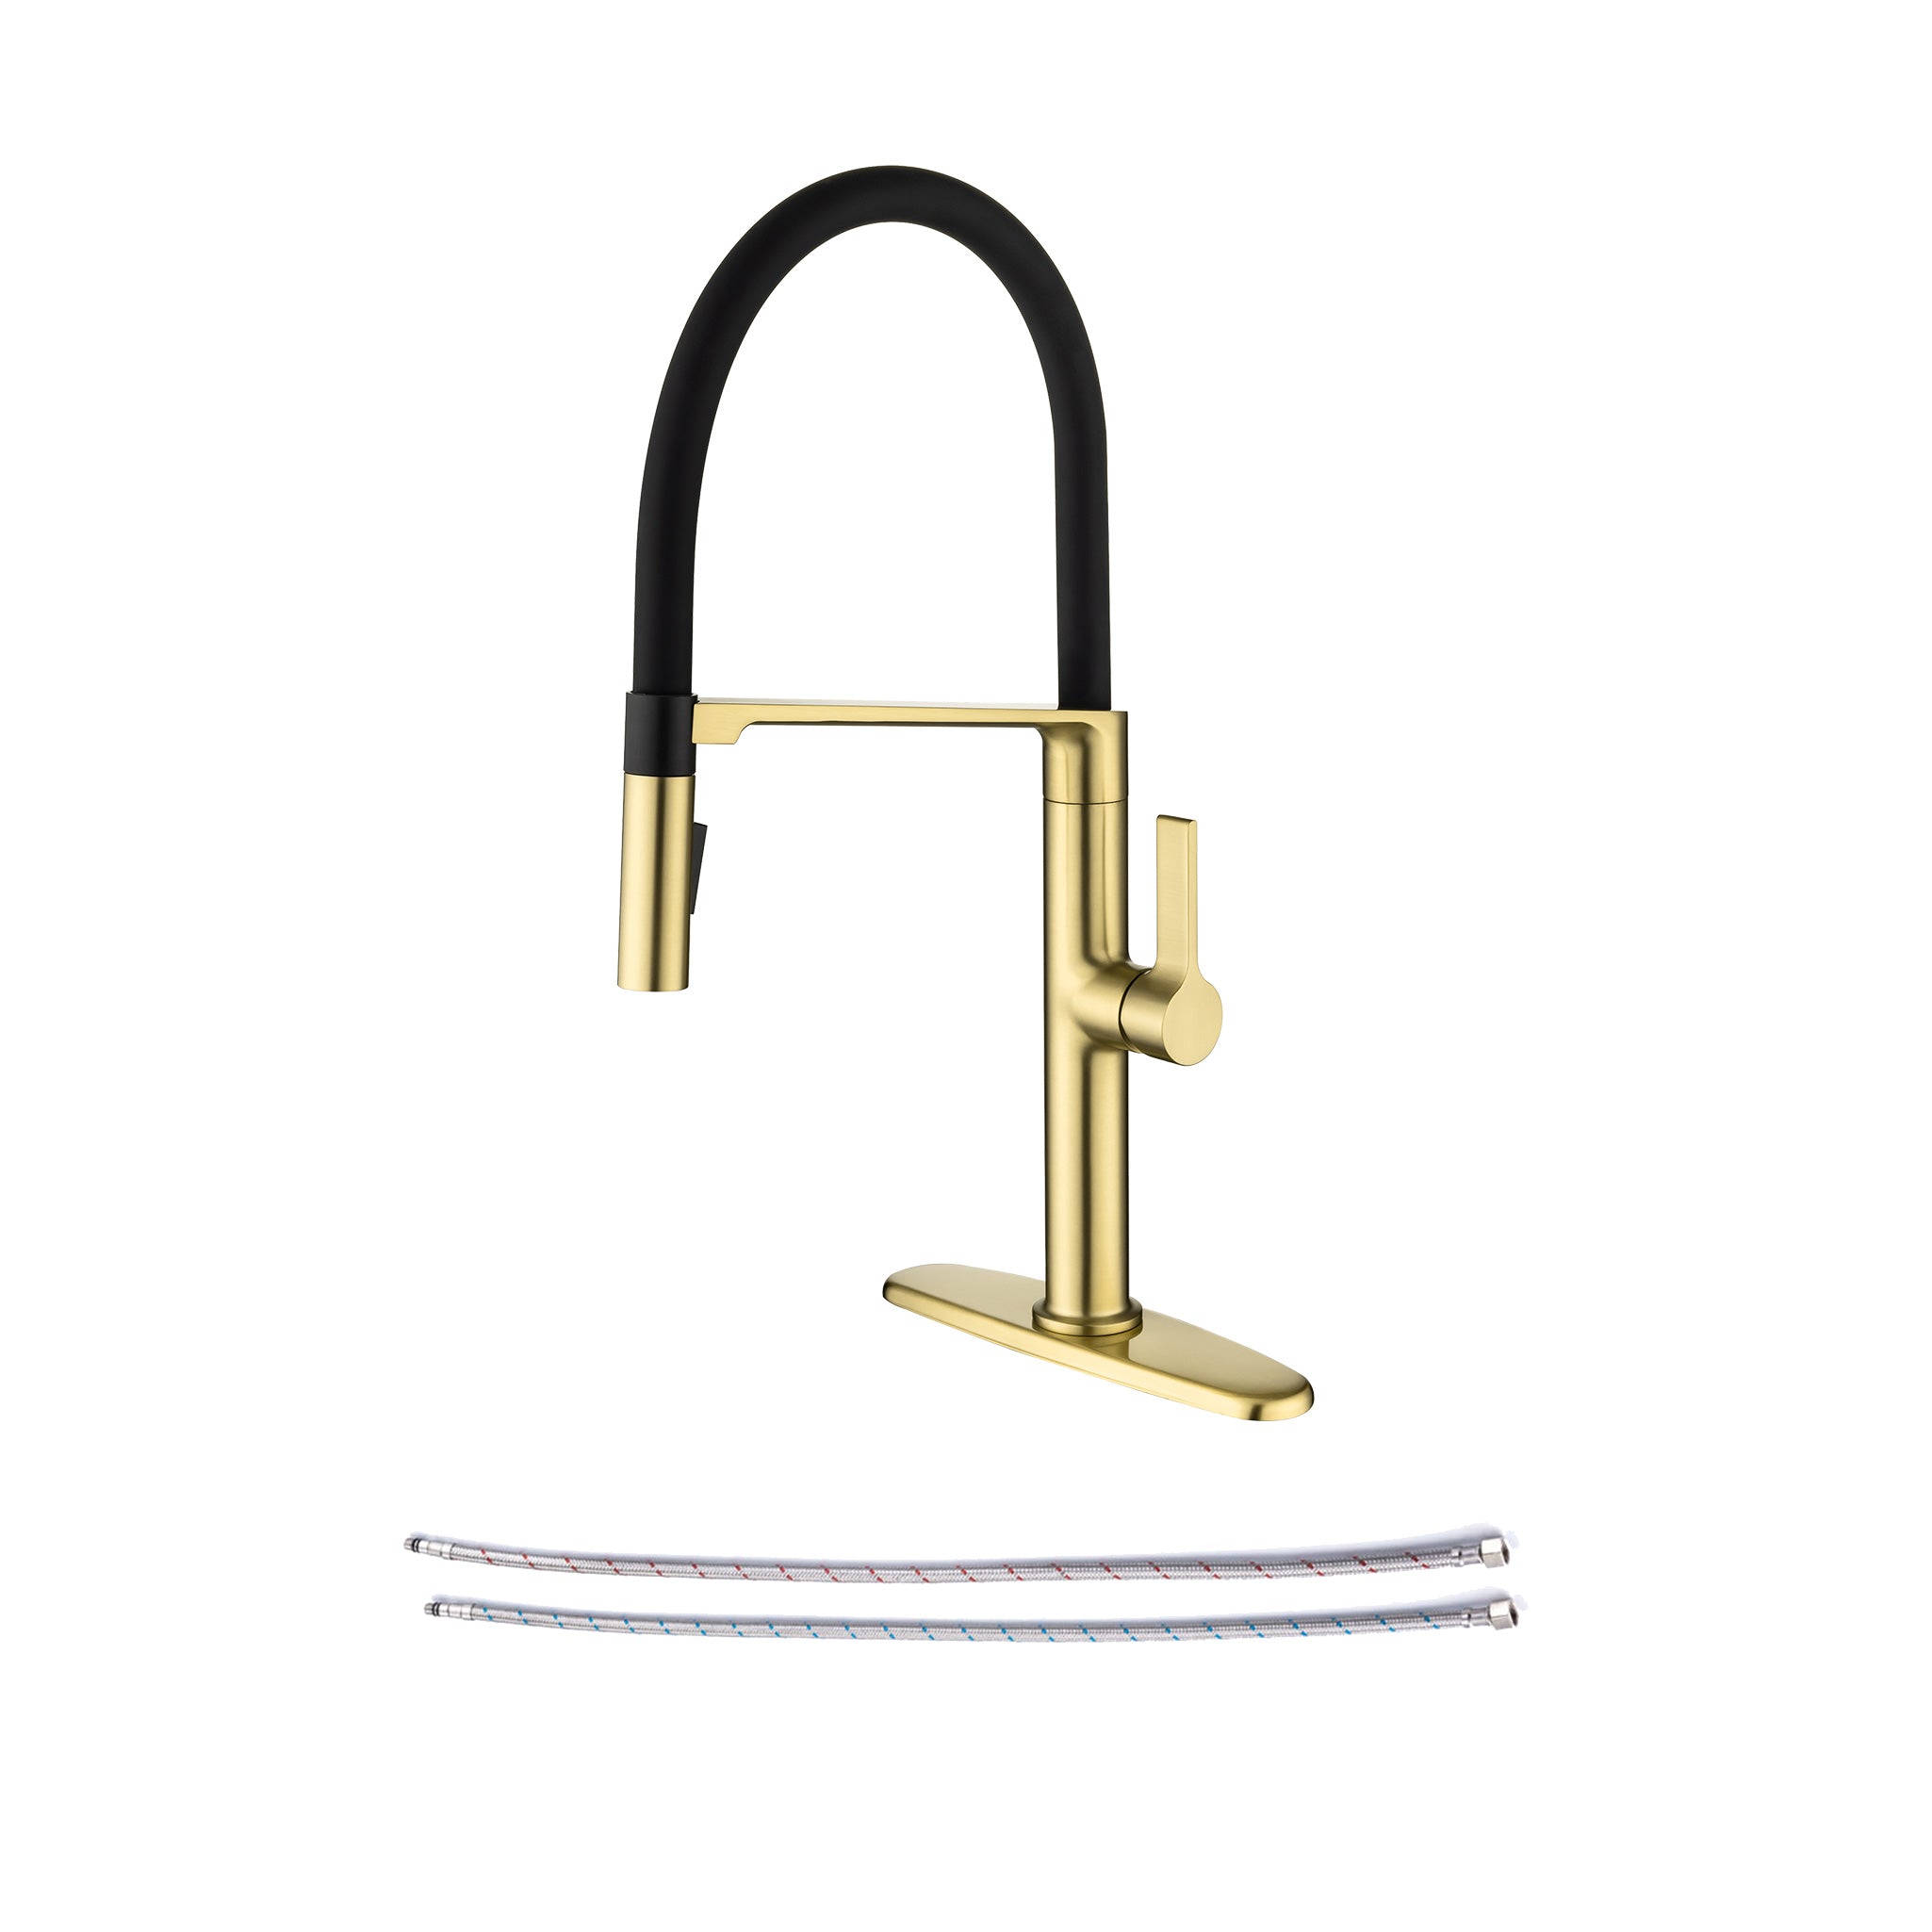 Pull-Down Single Handle Kitchen Faucet RX6006